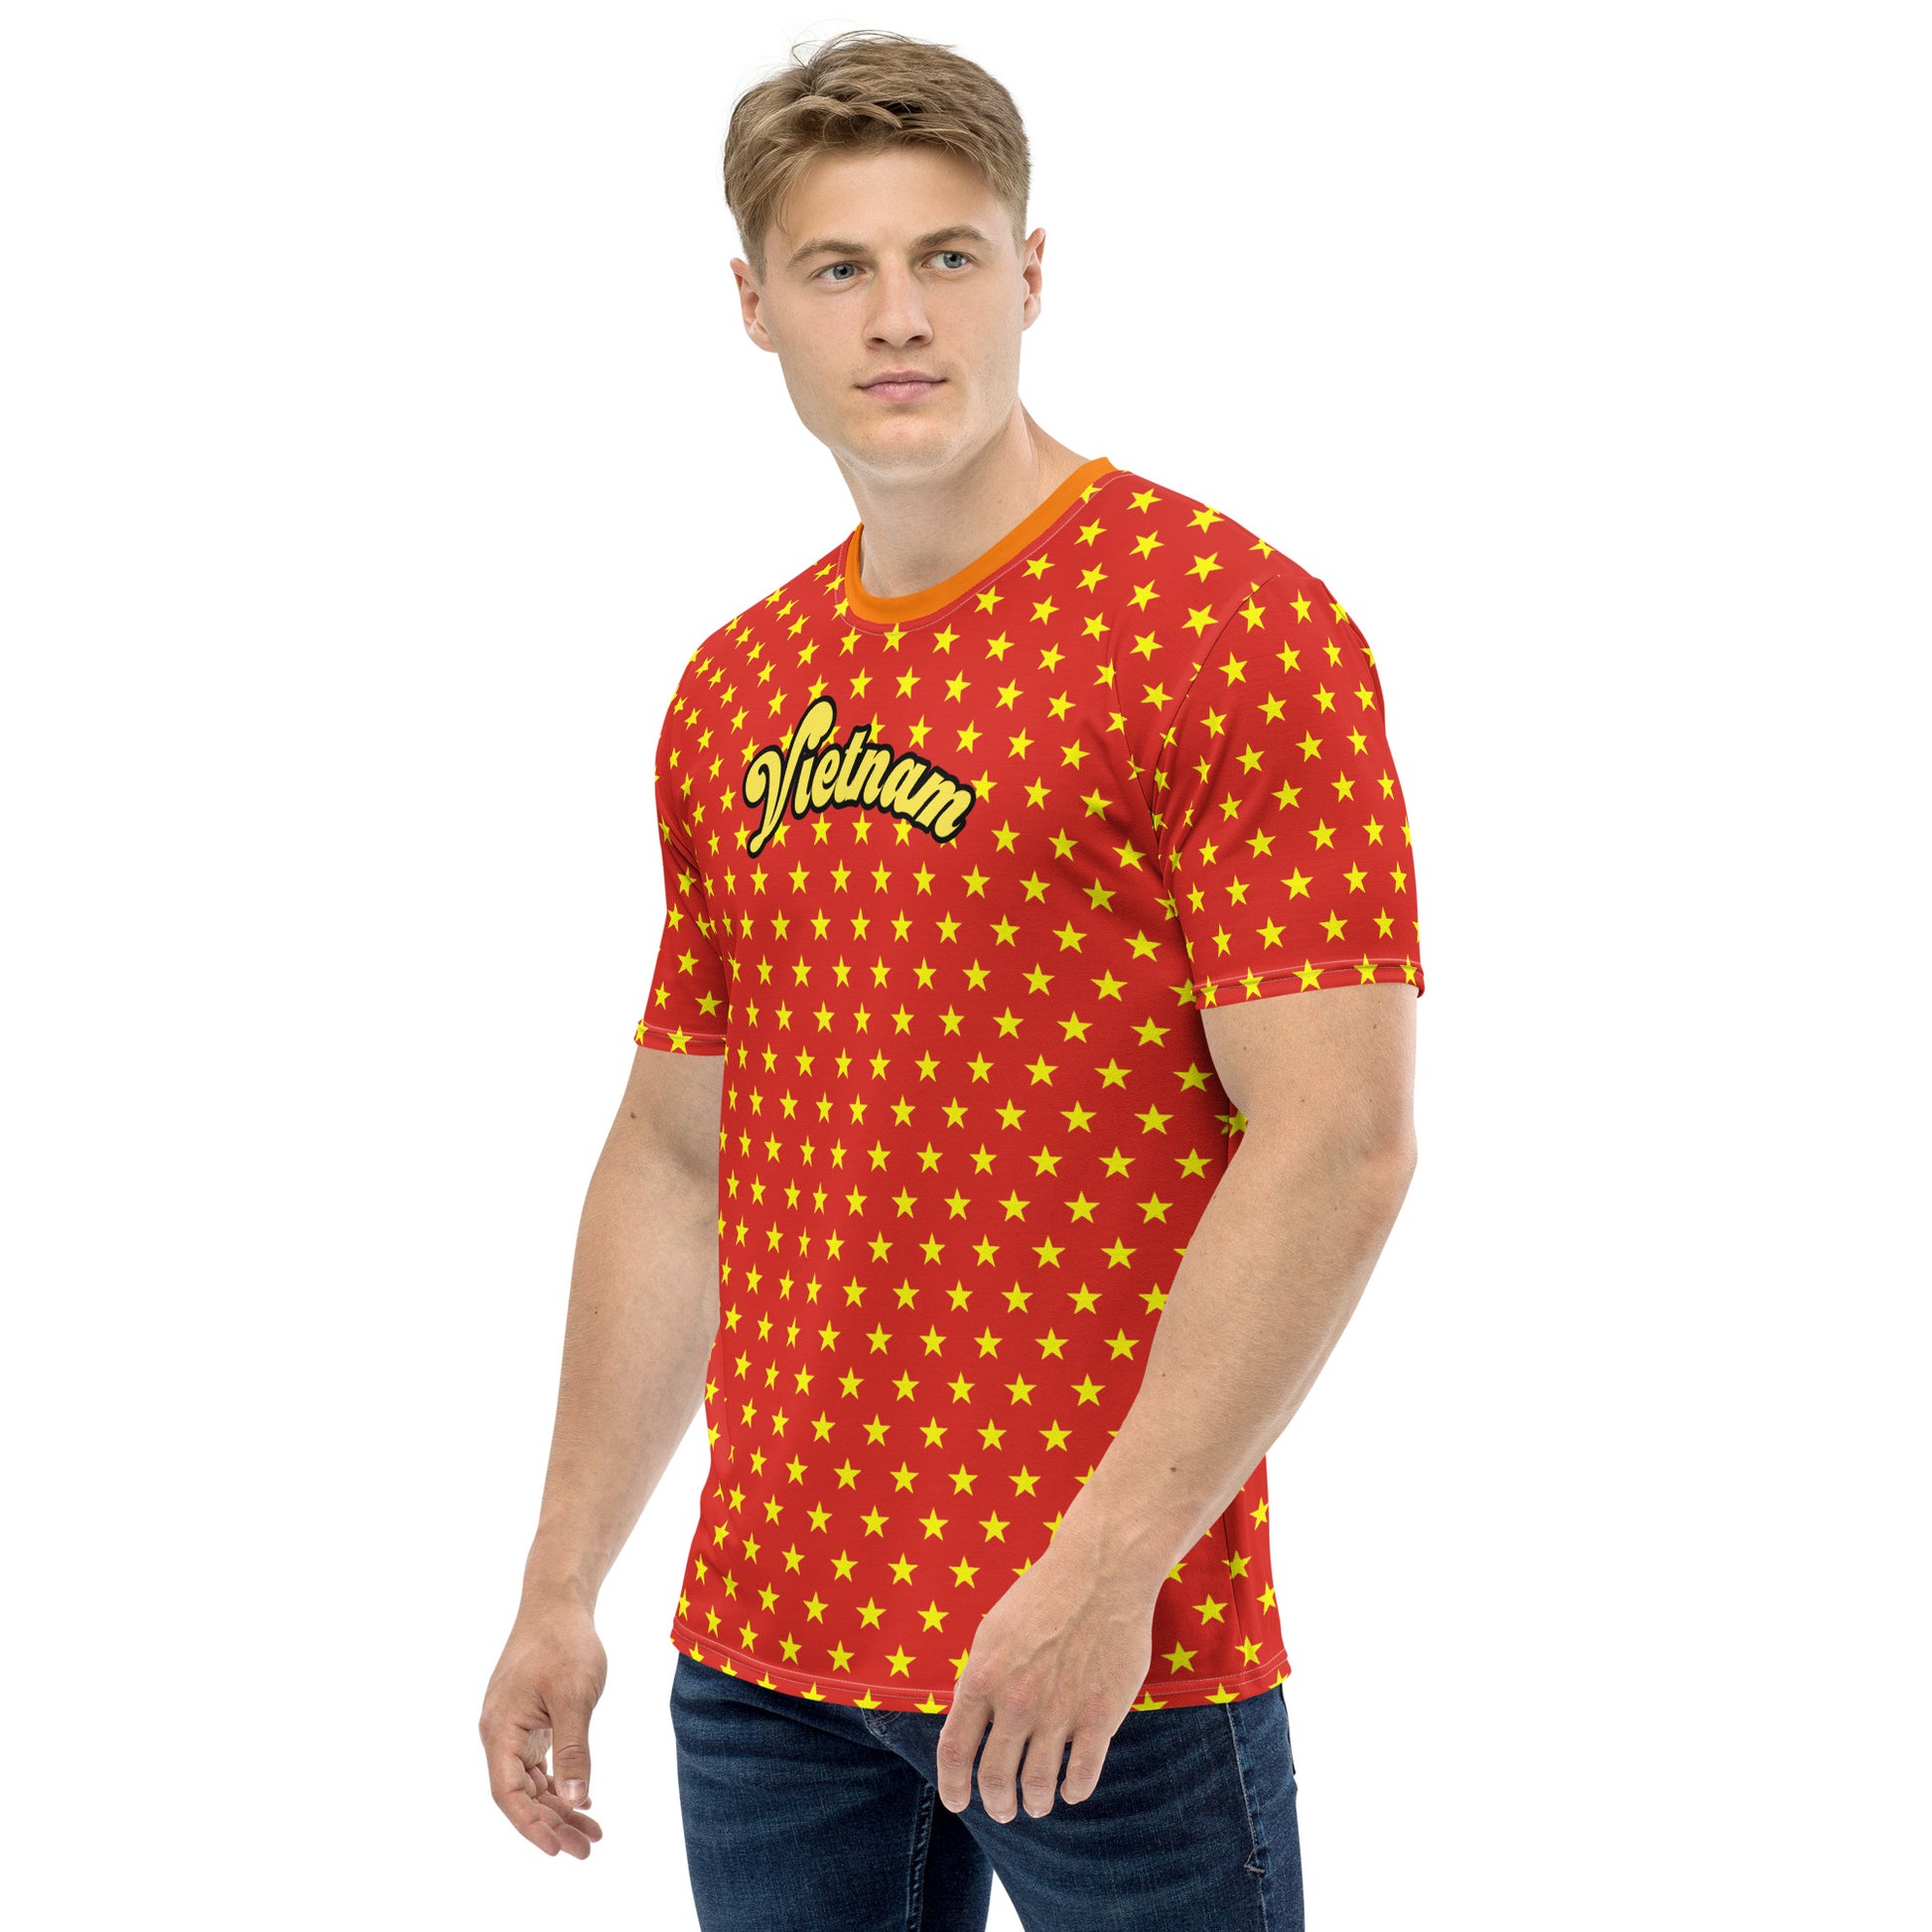 Stand Out in this Men's Vietnam T-Shirt with Yellow Polka Dots